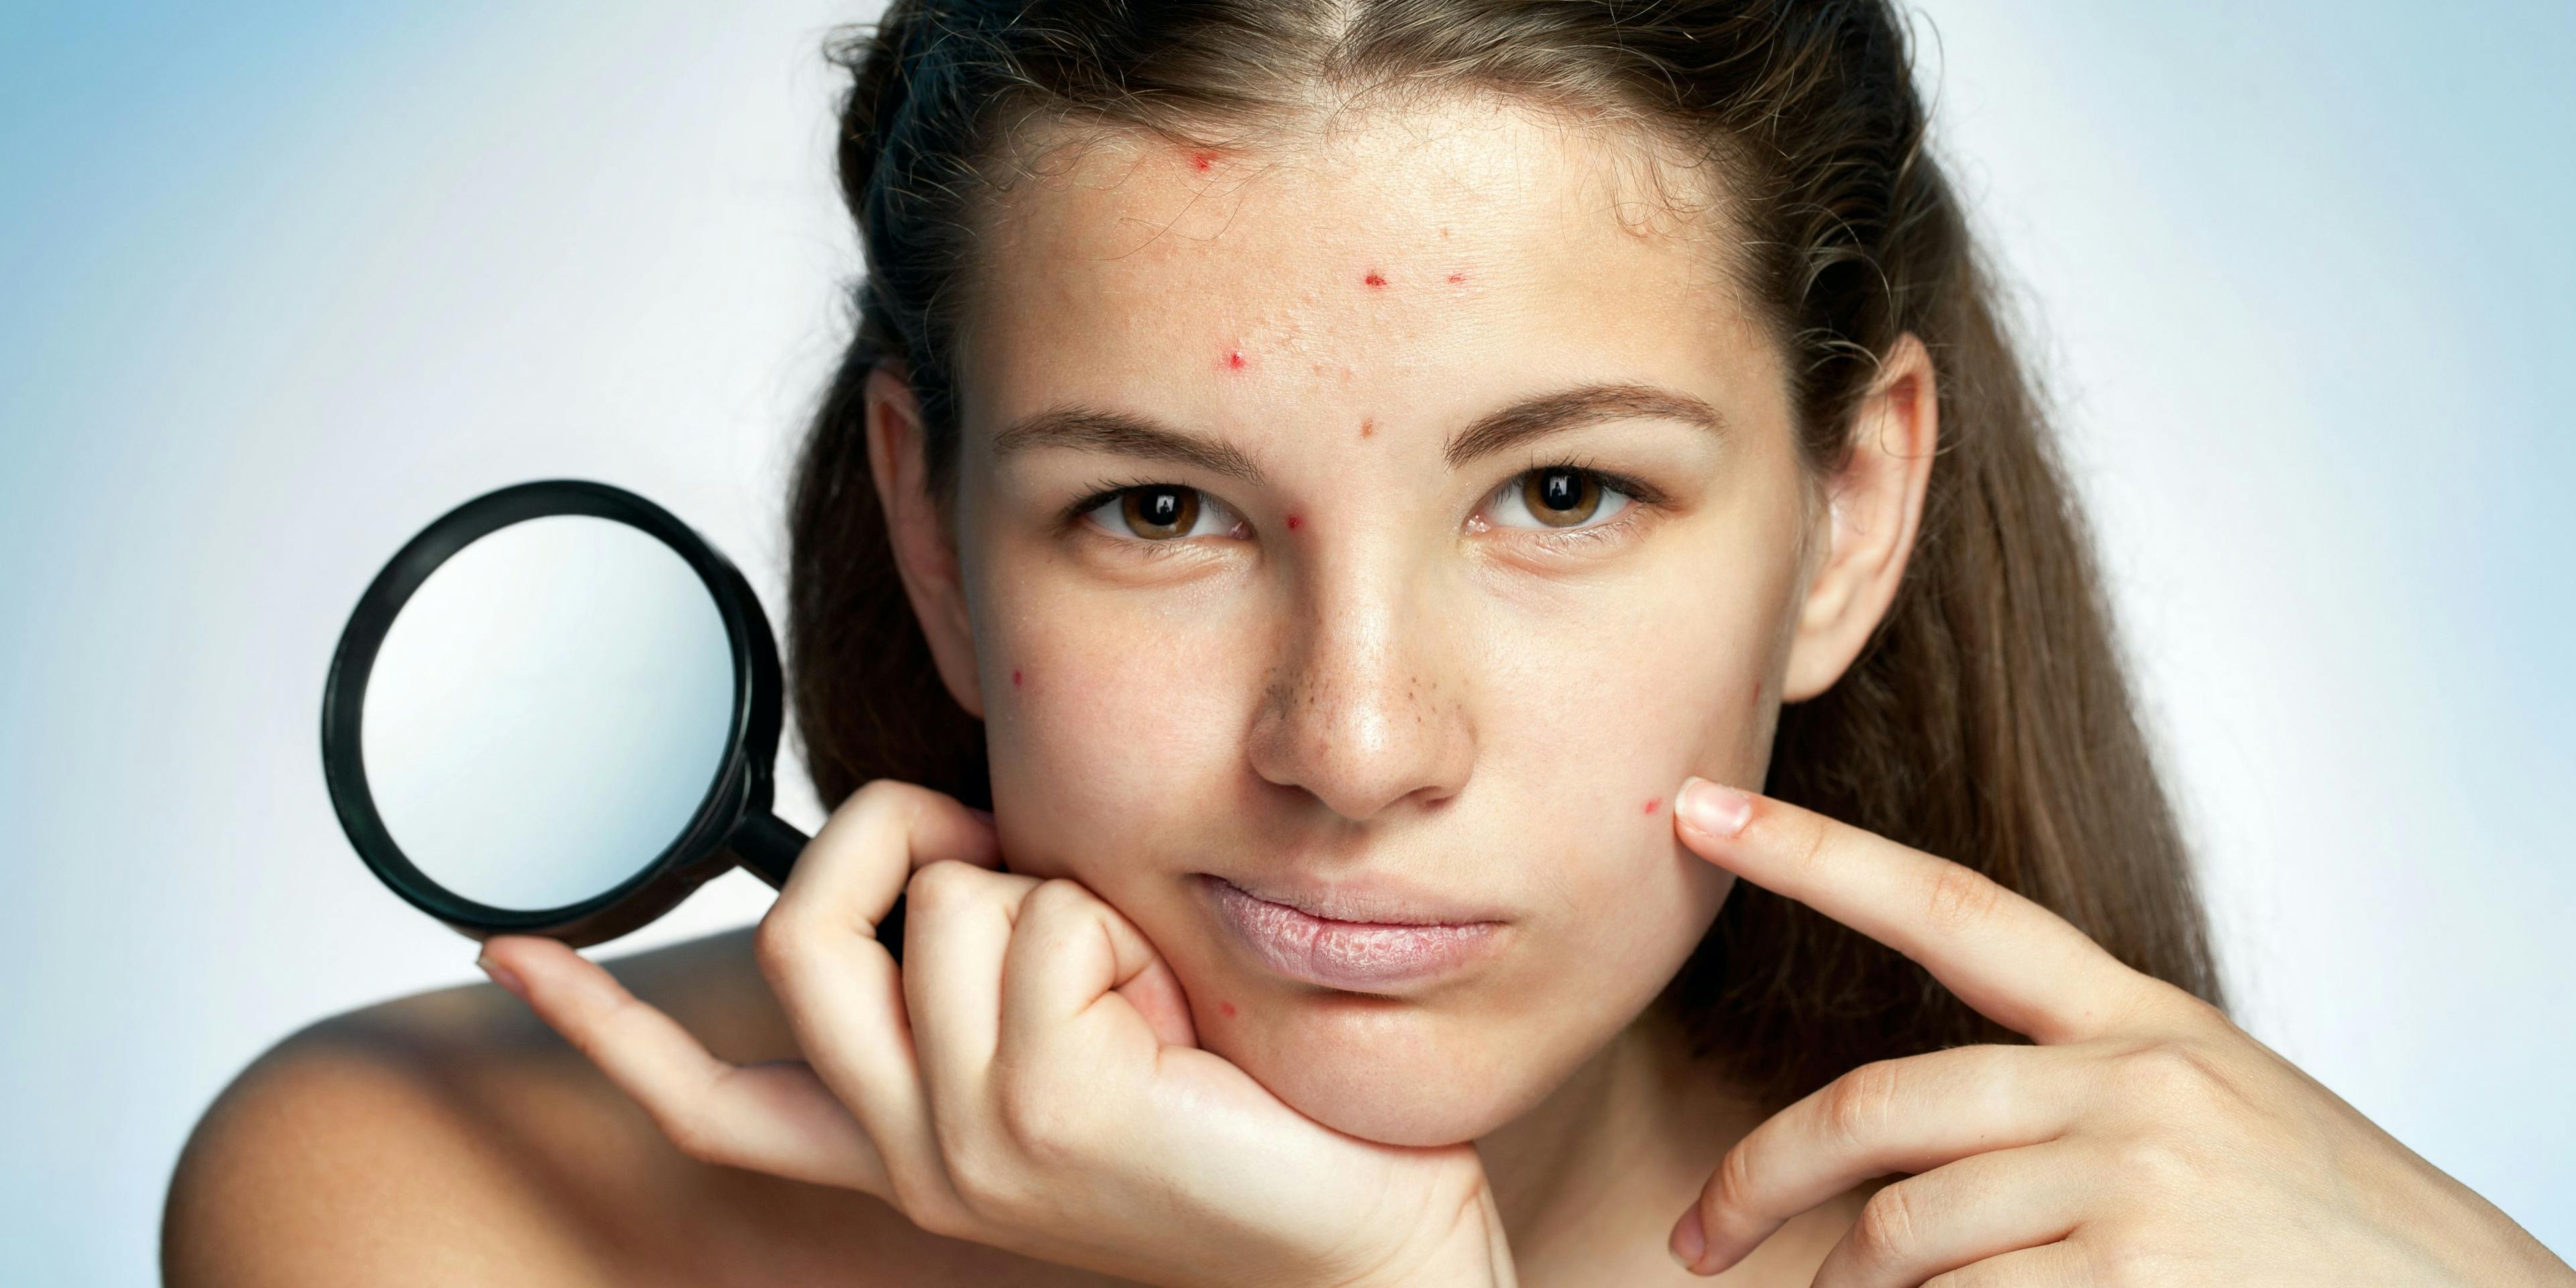 FDA Approves Onexton Gel for Acne